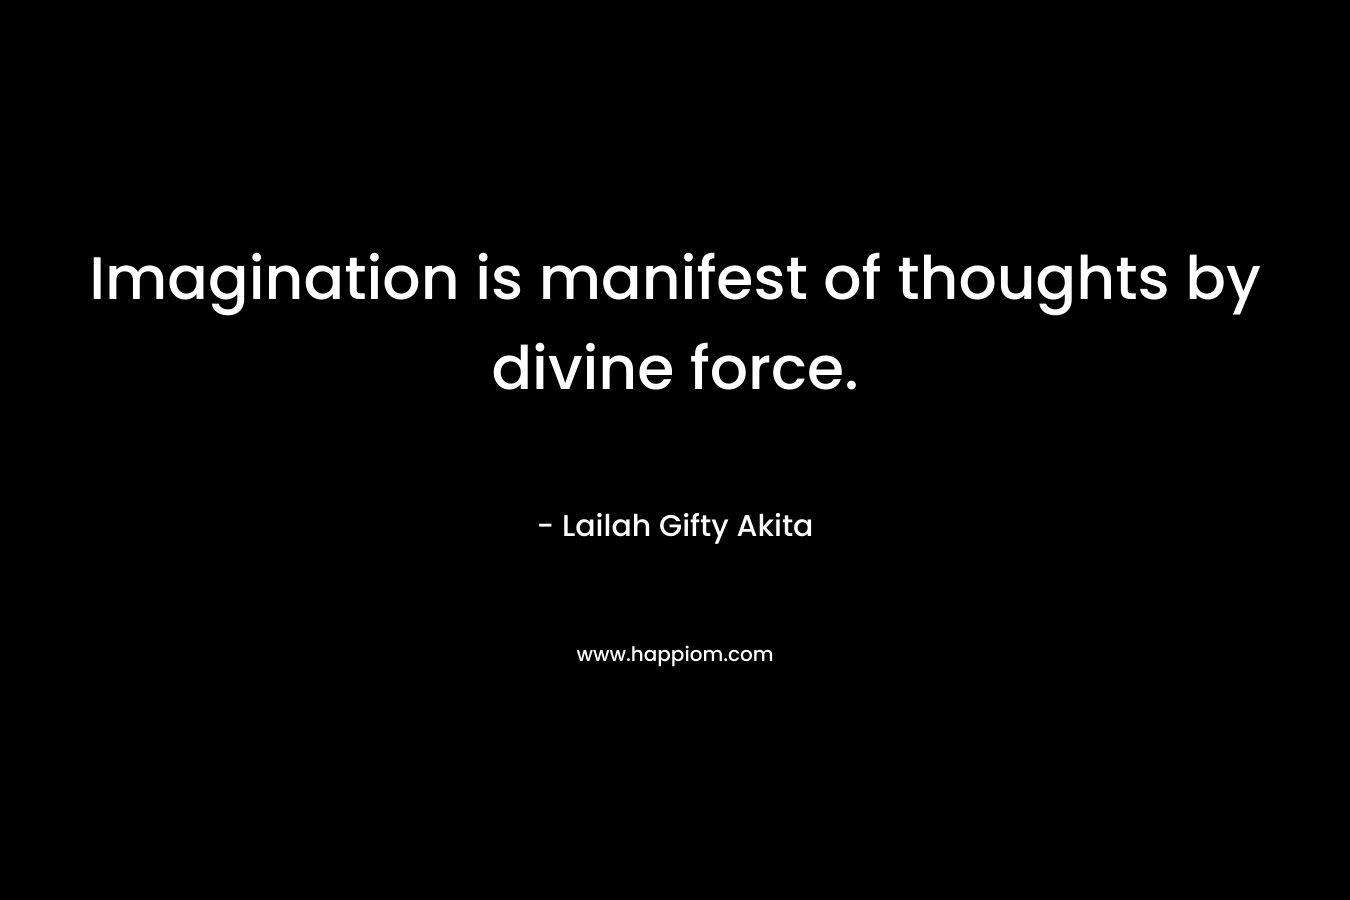 Imagination is manifest of thoughts by divine force.